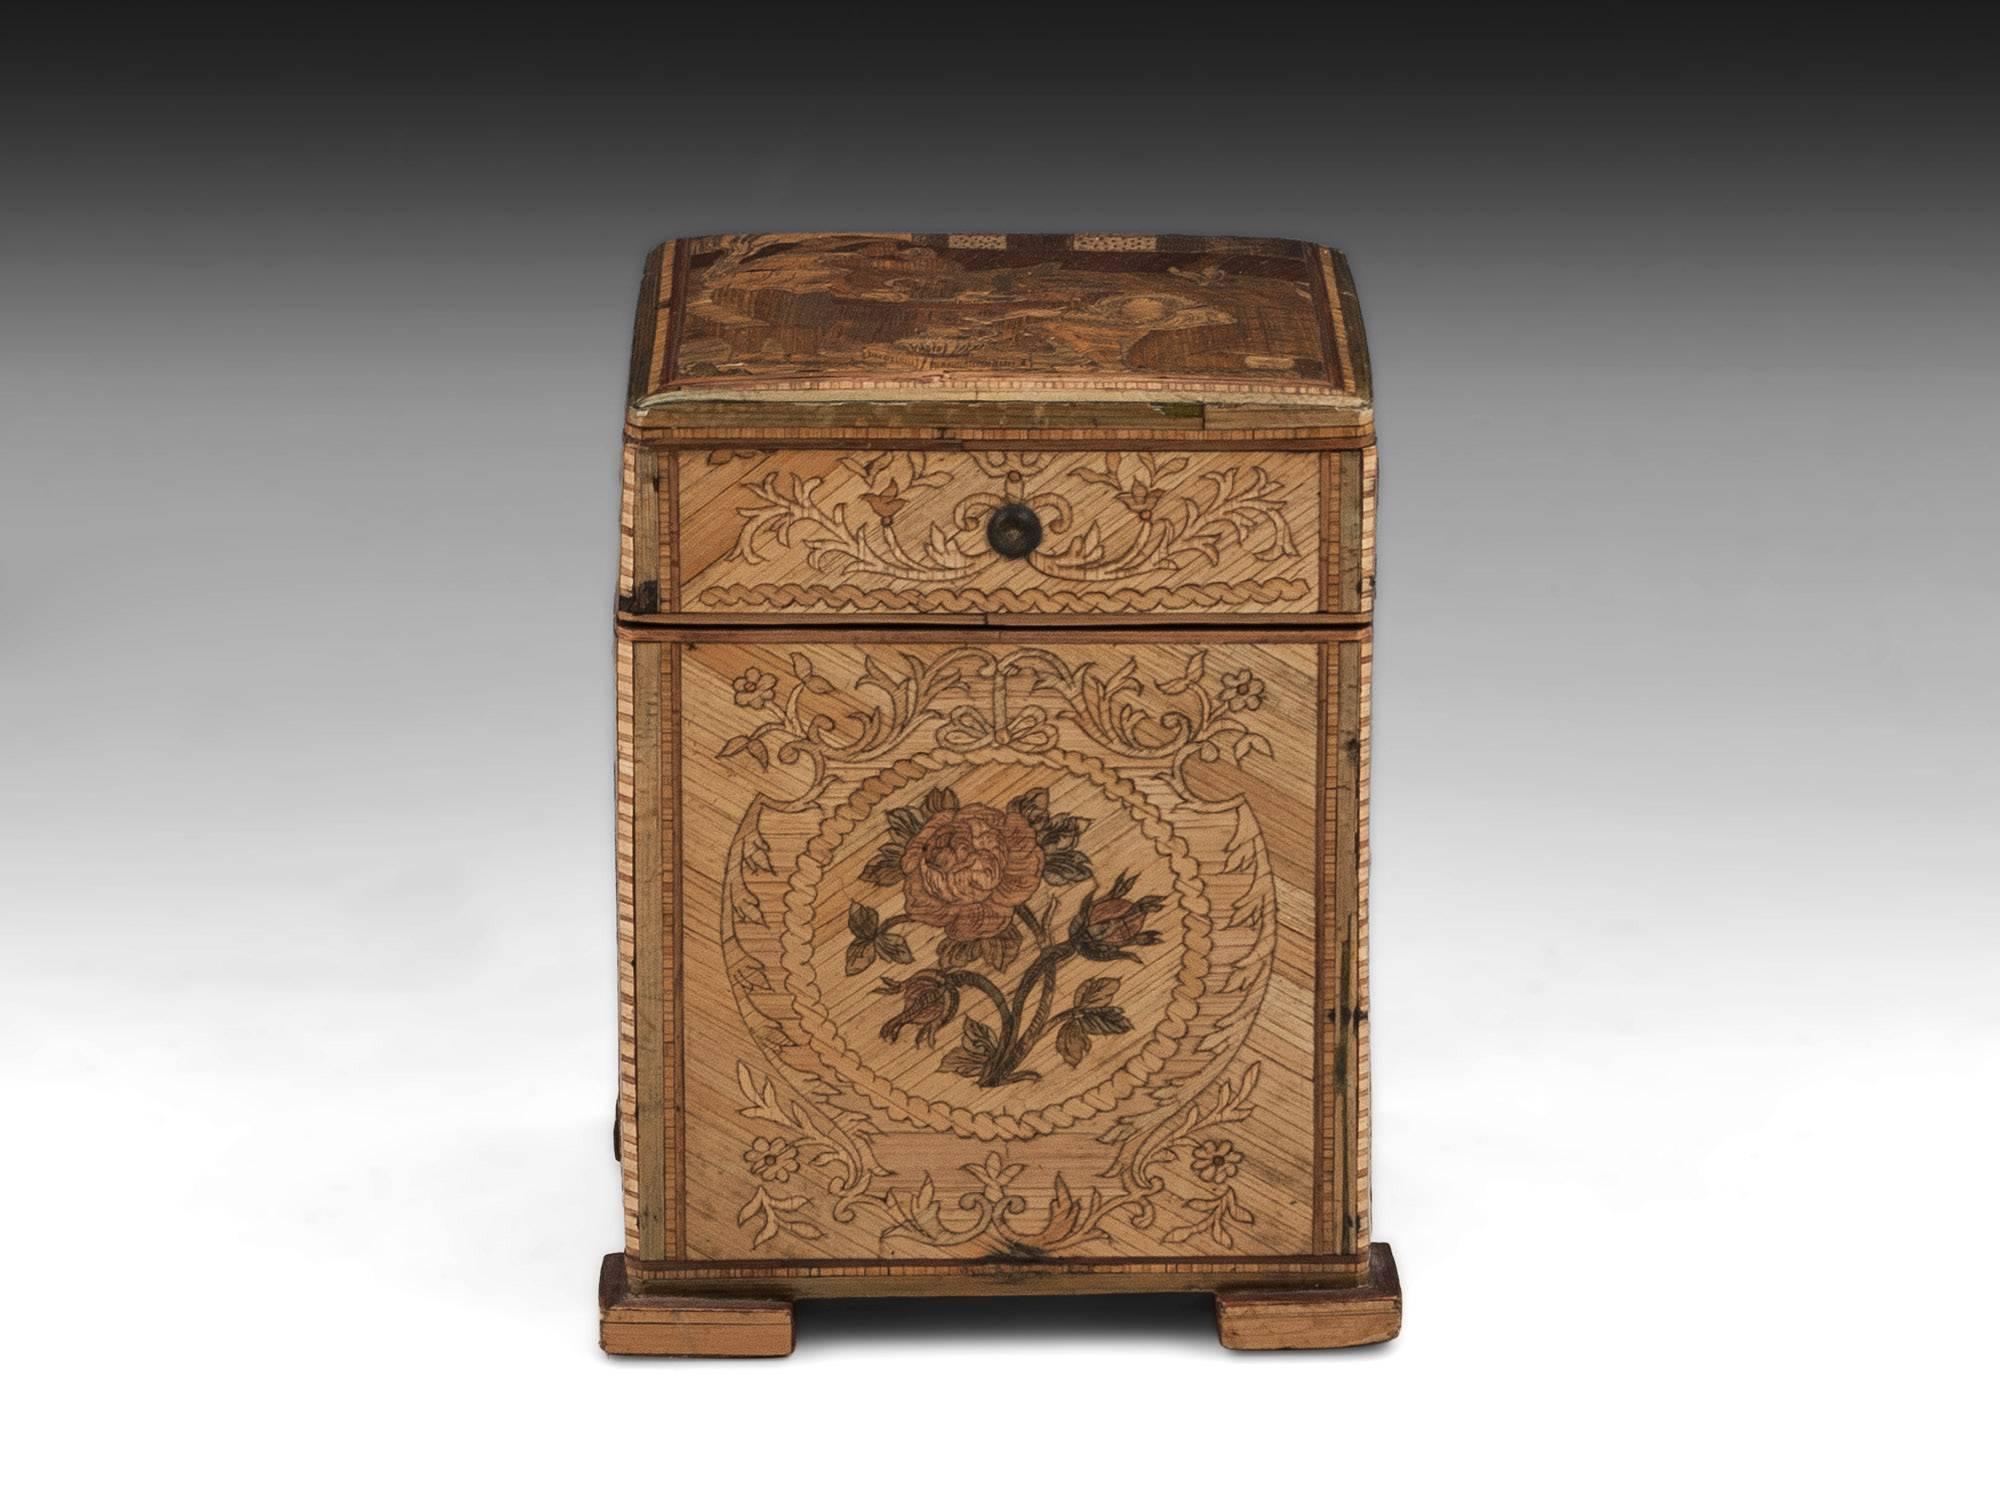 Straw work tea caddy. Skilfully made from pine covered with thin natural and dyed straw to create wonderful elaborate marquetry patterns. The sides each have a different flower marquetry and are framed with further elaborate designs. The lid